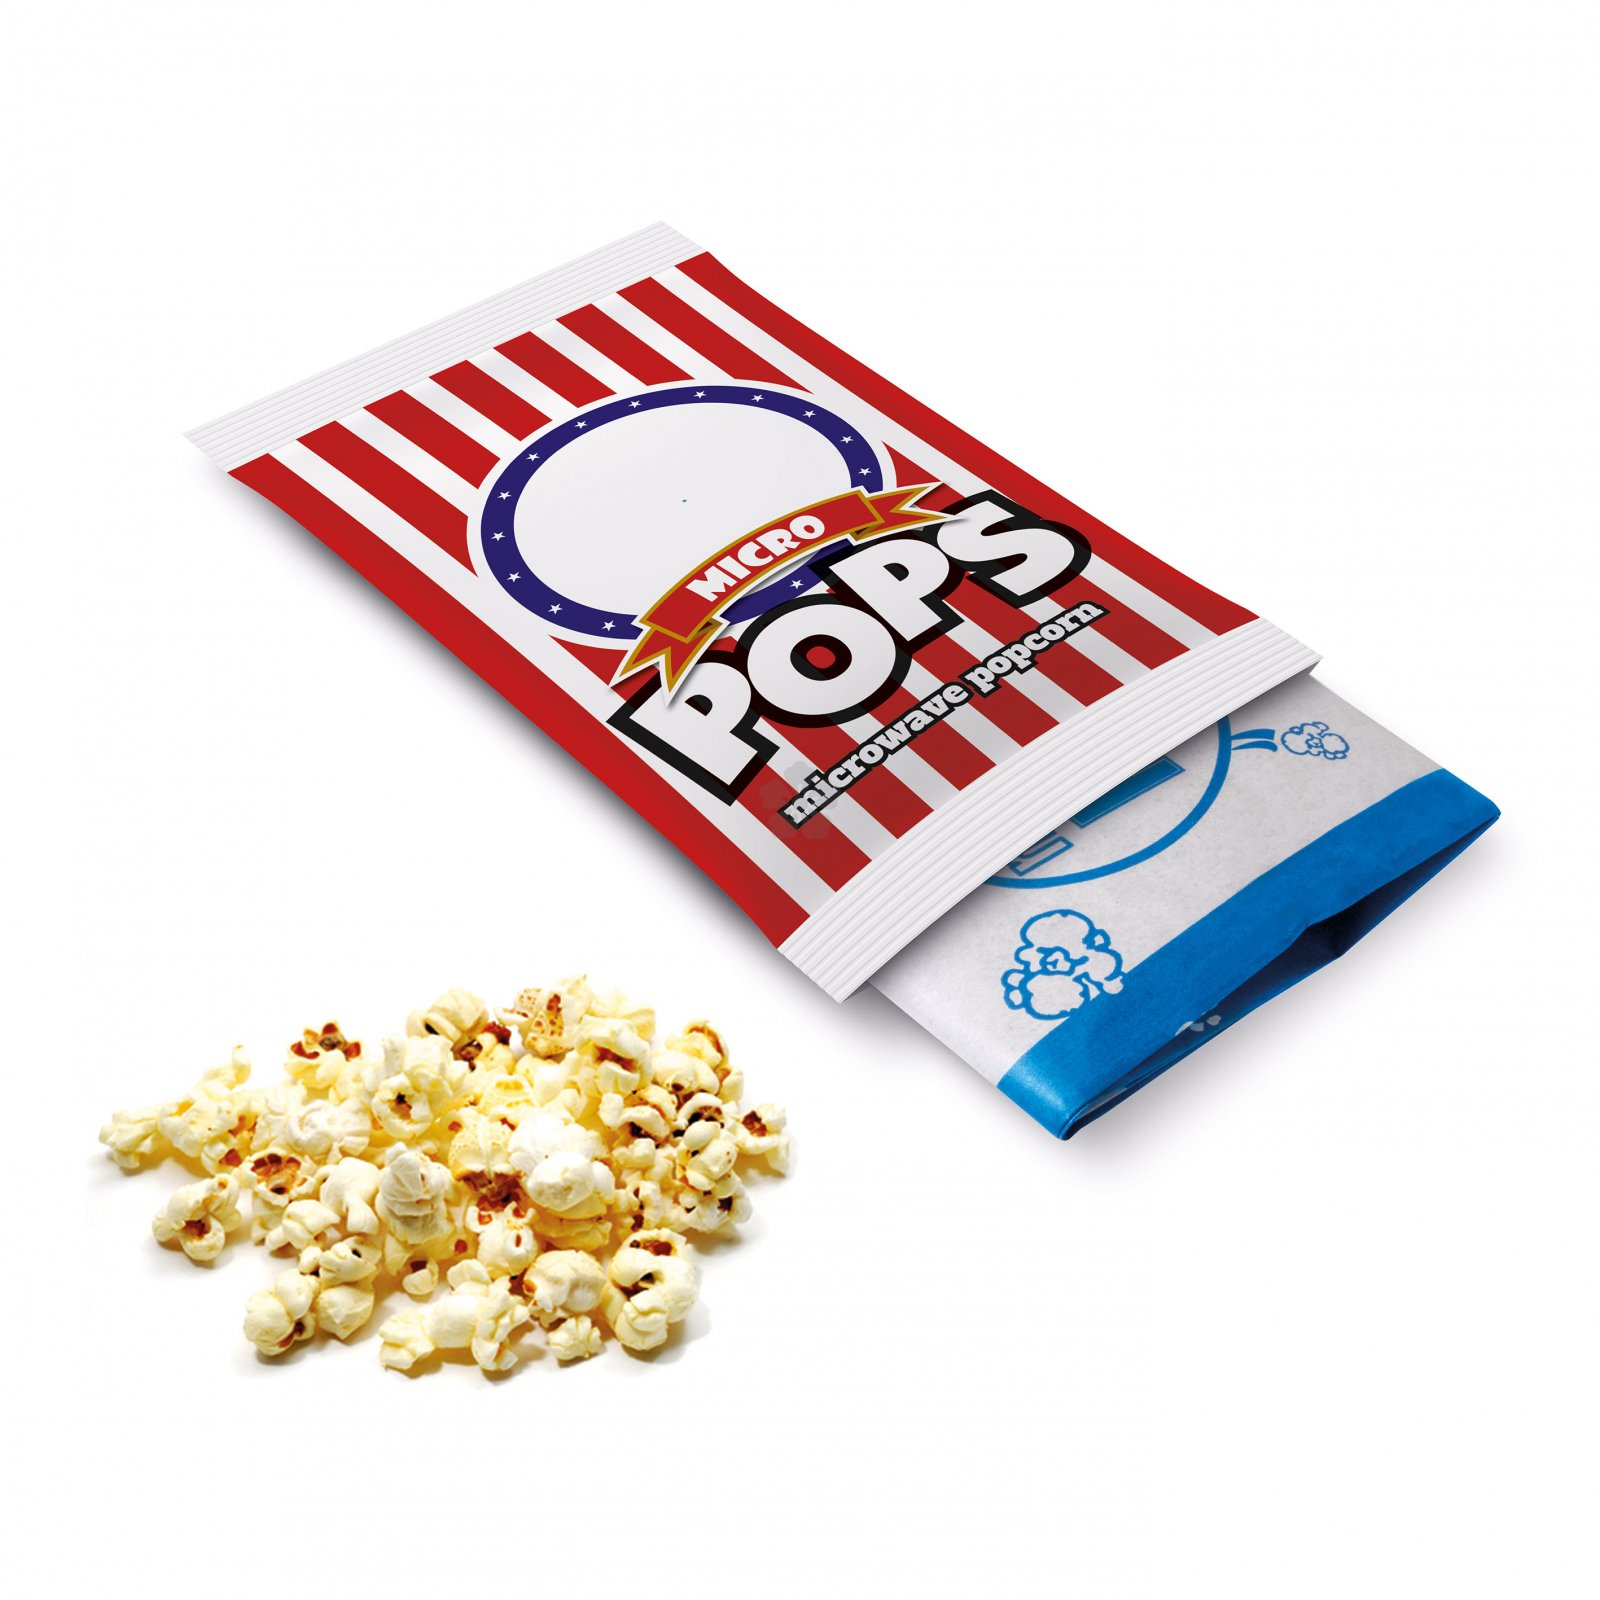 Promotional Microwaveable Popcorn, Personalised by MoJo Promotions